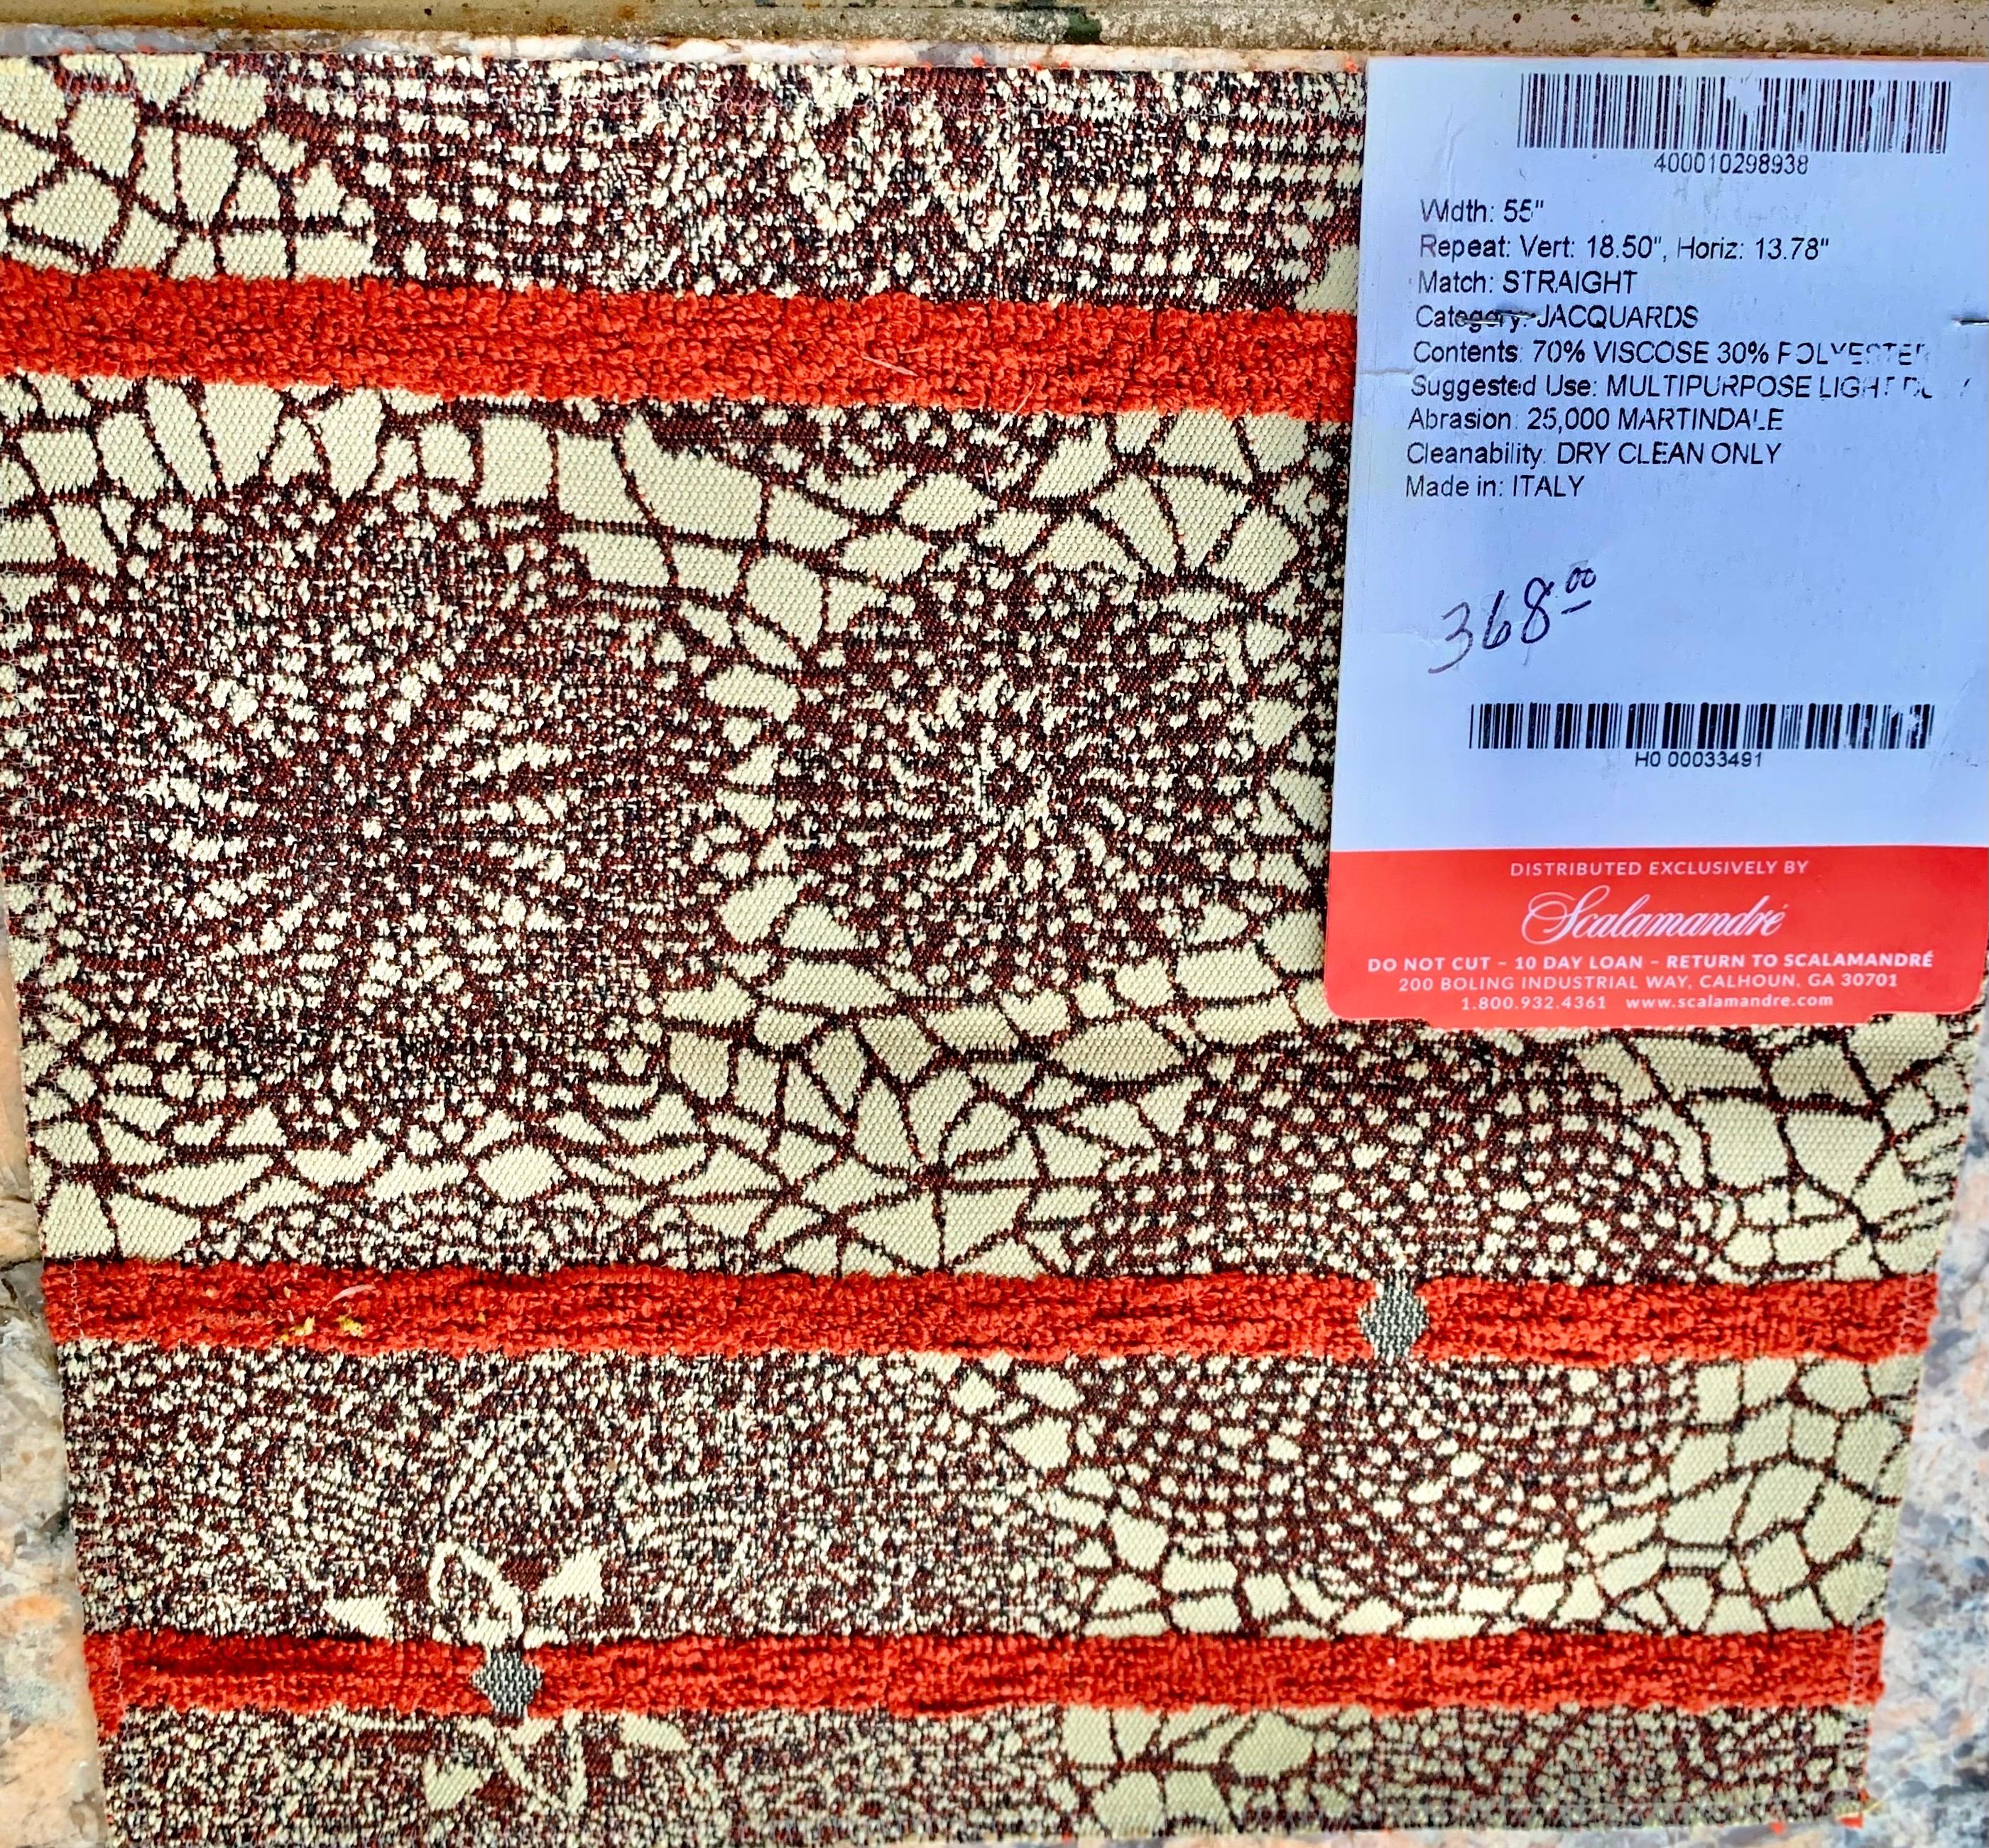 Listed here is this three yard roll of brand new house of Scalamandre fabric, designed by Jean Paul Gaultier and woven in Italy of polyester and viscose. Pattern: Macrame, Color: Brique. Retails for $368.00 per yard, Here offered at $175.00 per yard.